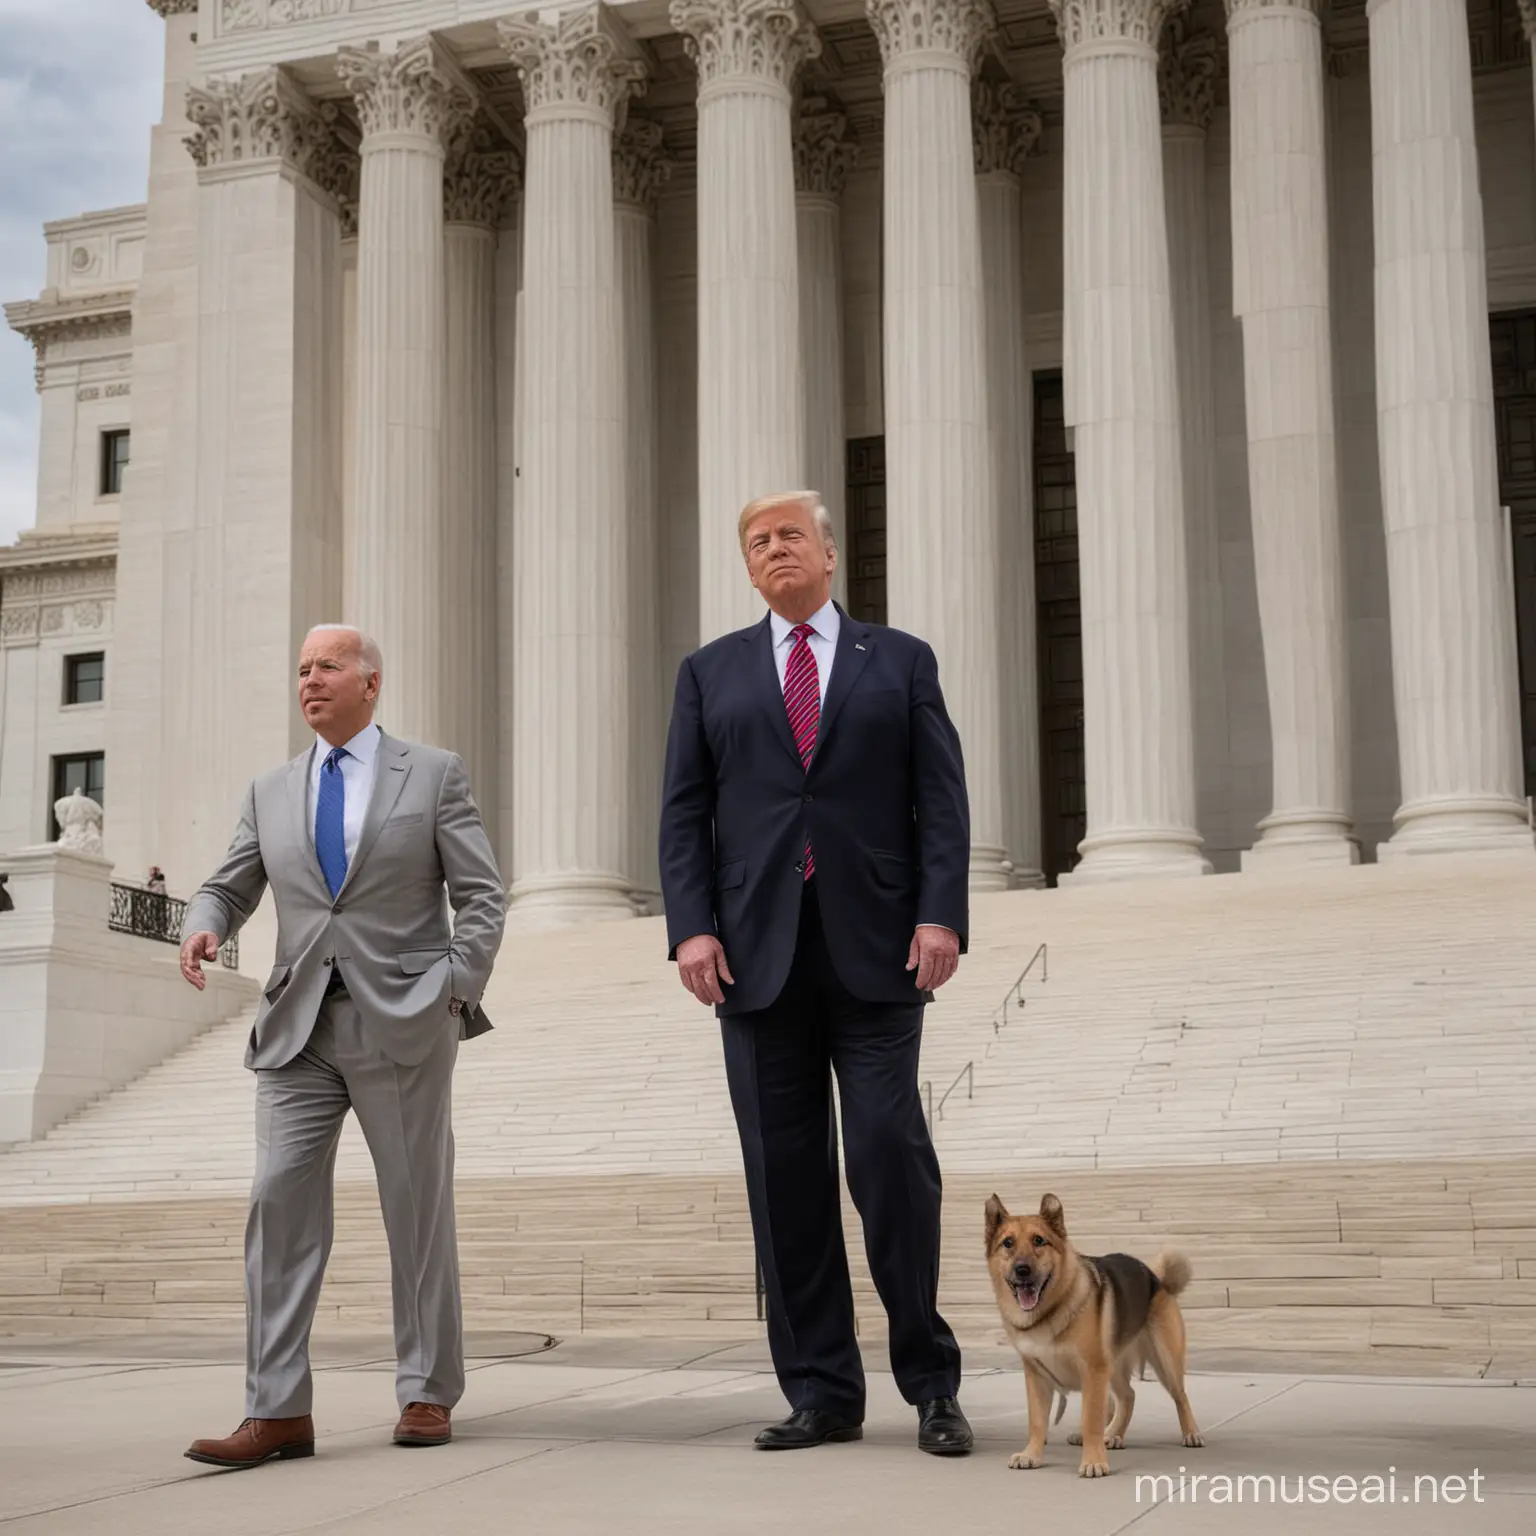 Joe Biden and Donald Trump looking up towards the Supreme Court from the street